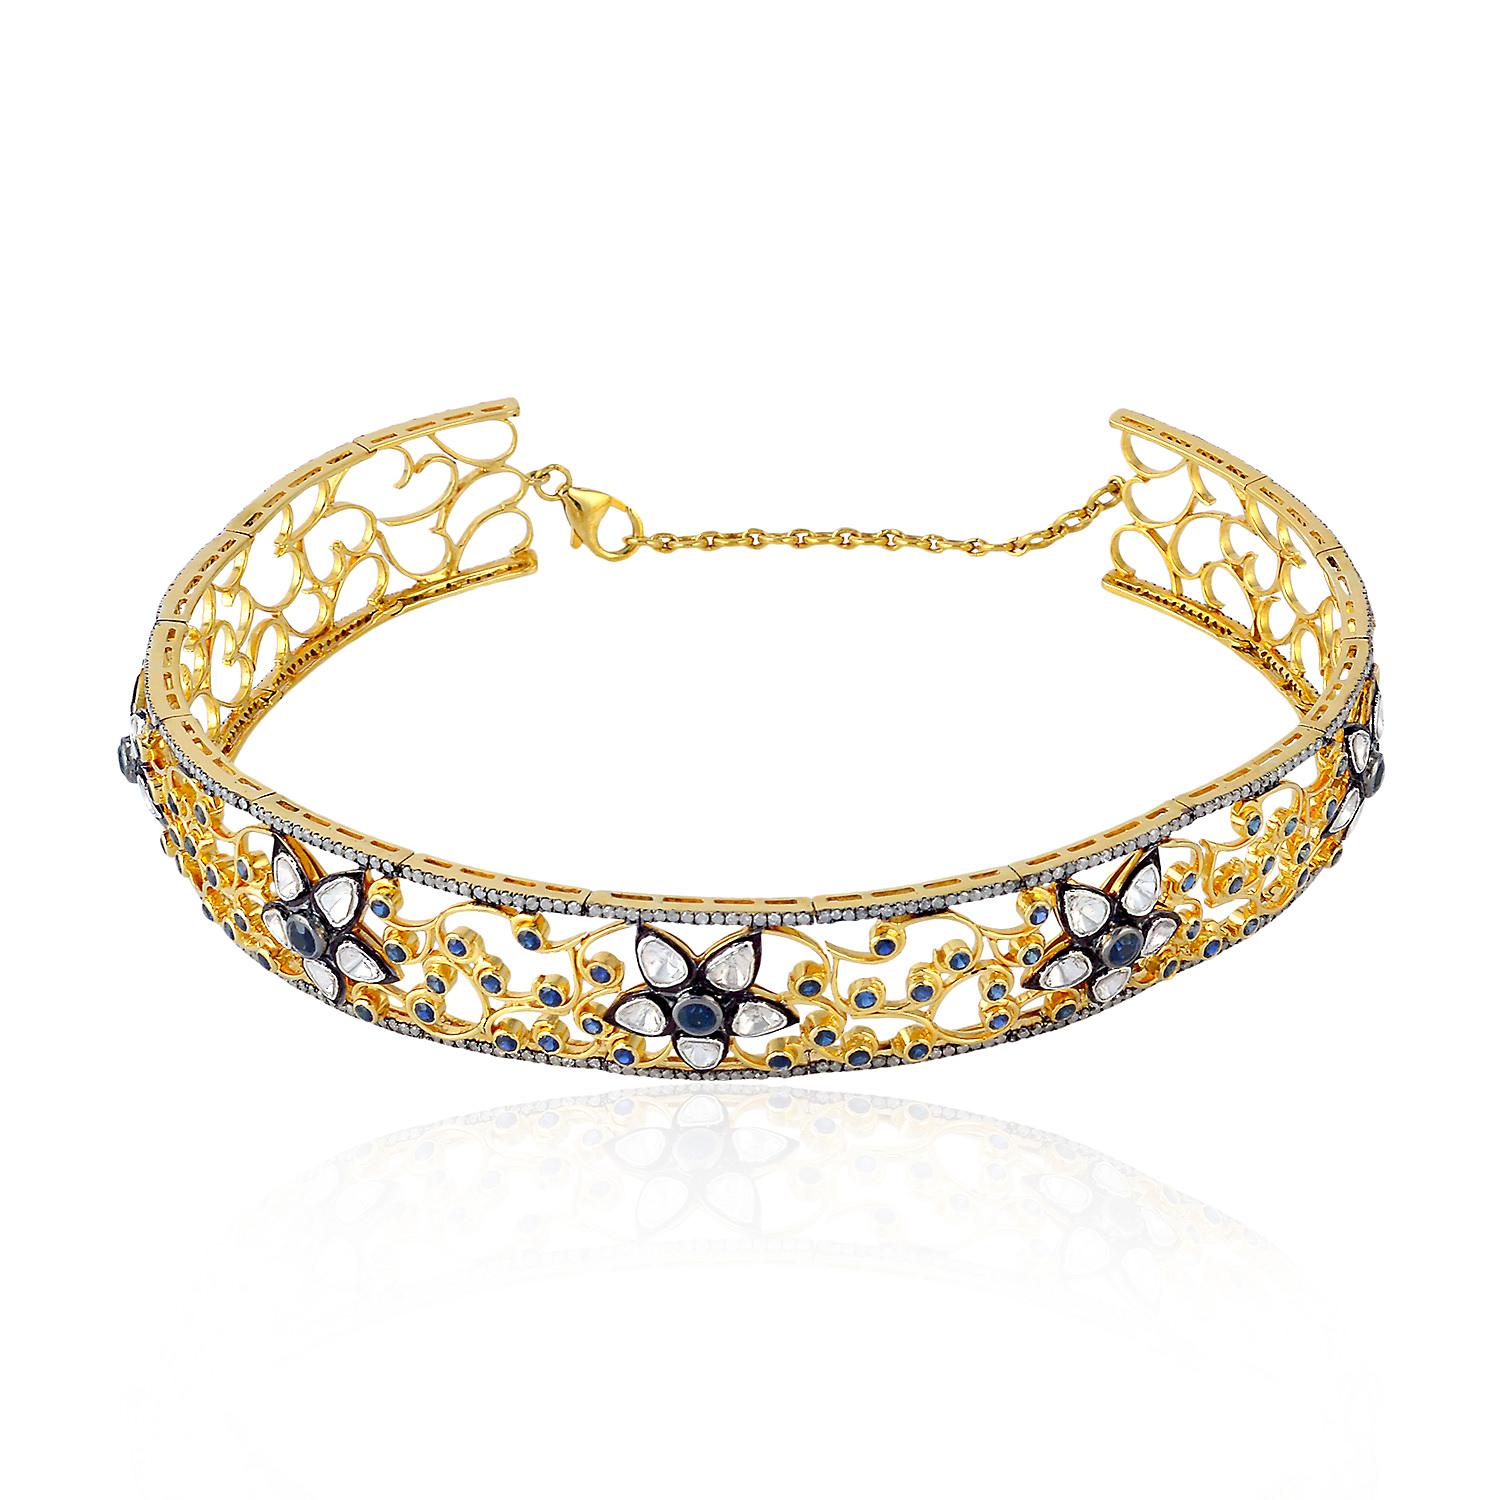 This exquisite choker necklace boasts a delicate filigree design crafted in 18k gold and silver, adorned with dazzling diamonds and sapphires. Its intricate and detailed craftsmanship makes it the perfect choice for a formal event or a special